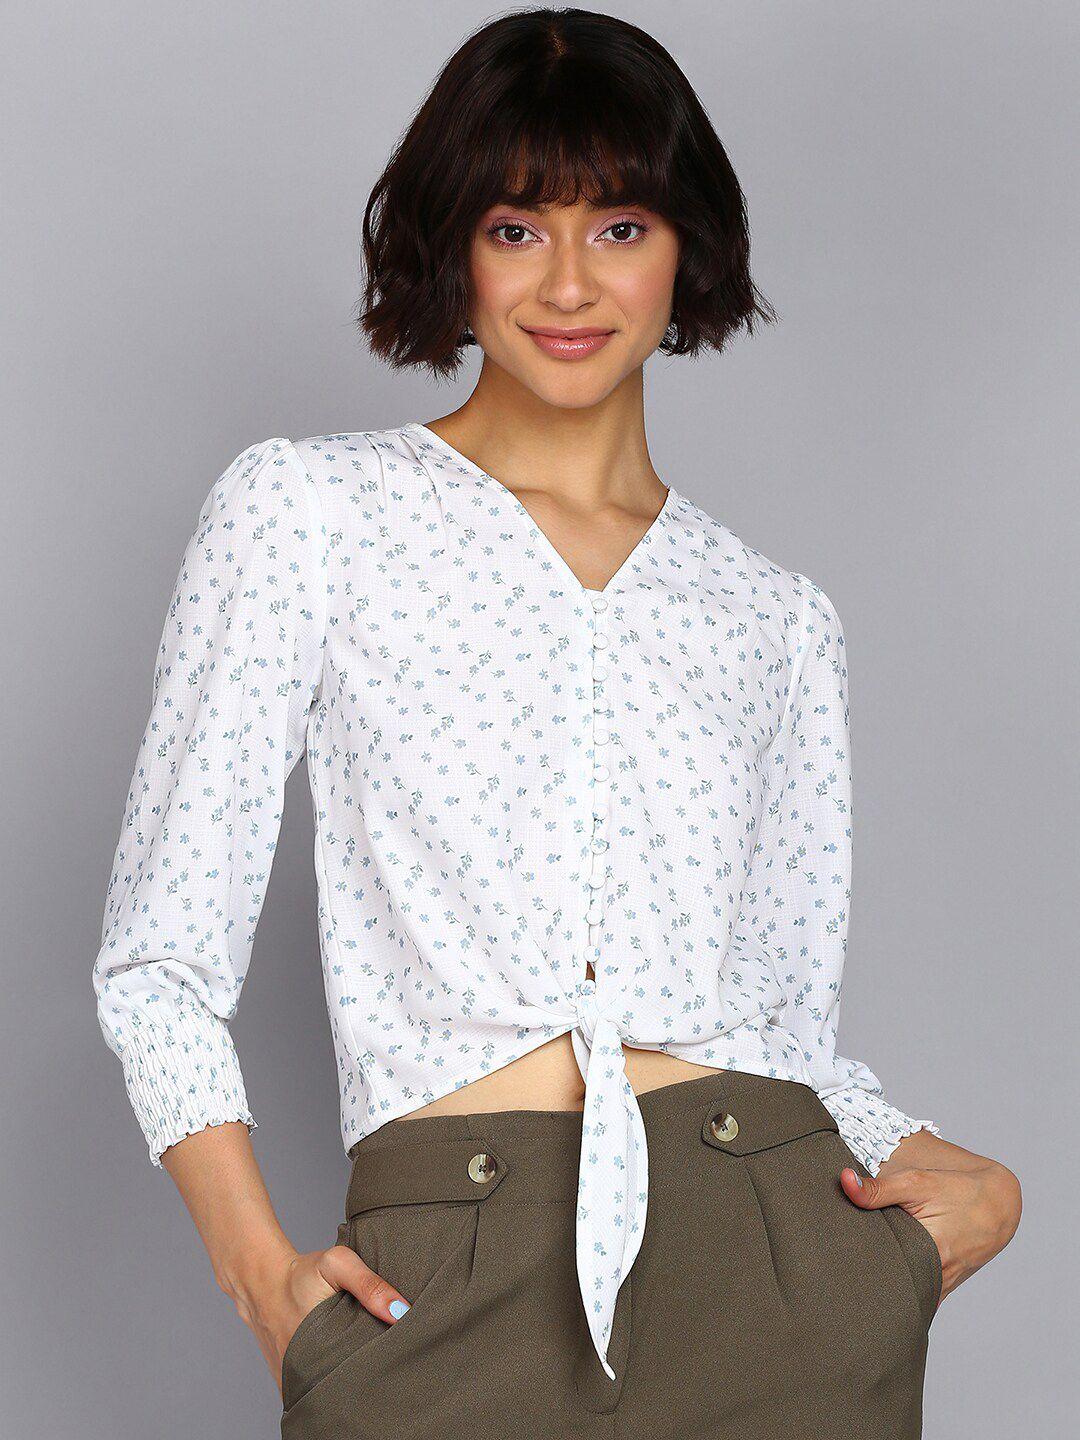 mast-&-harbour-white-floral-print-crepe-shirt-style-crop-top